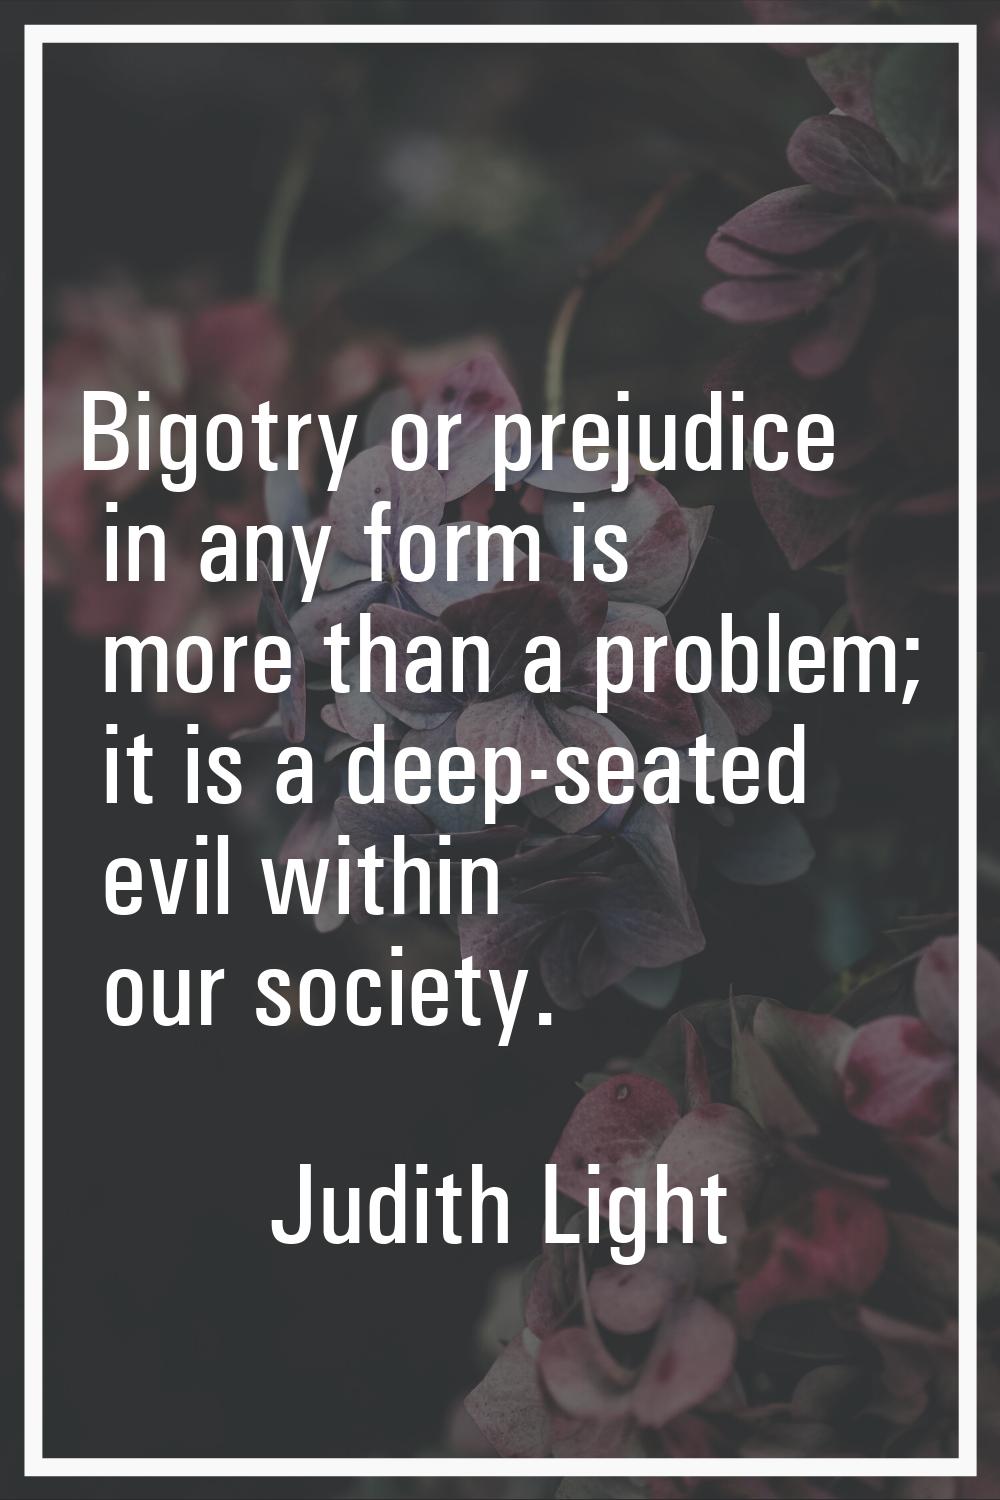 Bigotry or prejudice in any form is more than a problem; it is a deep-seated evil within our societ